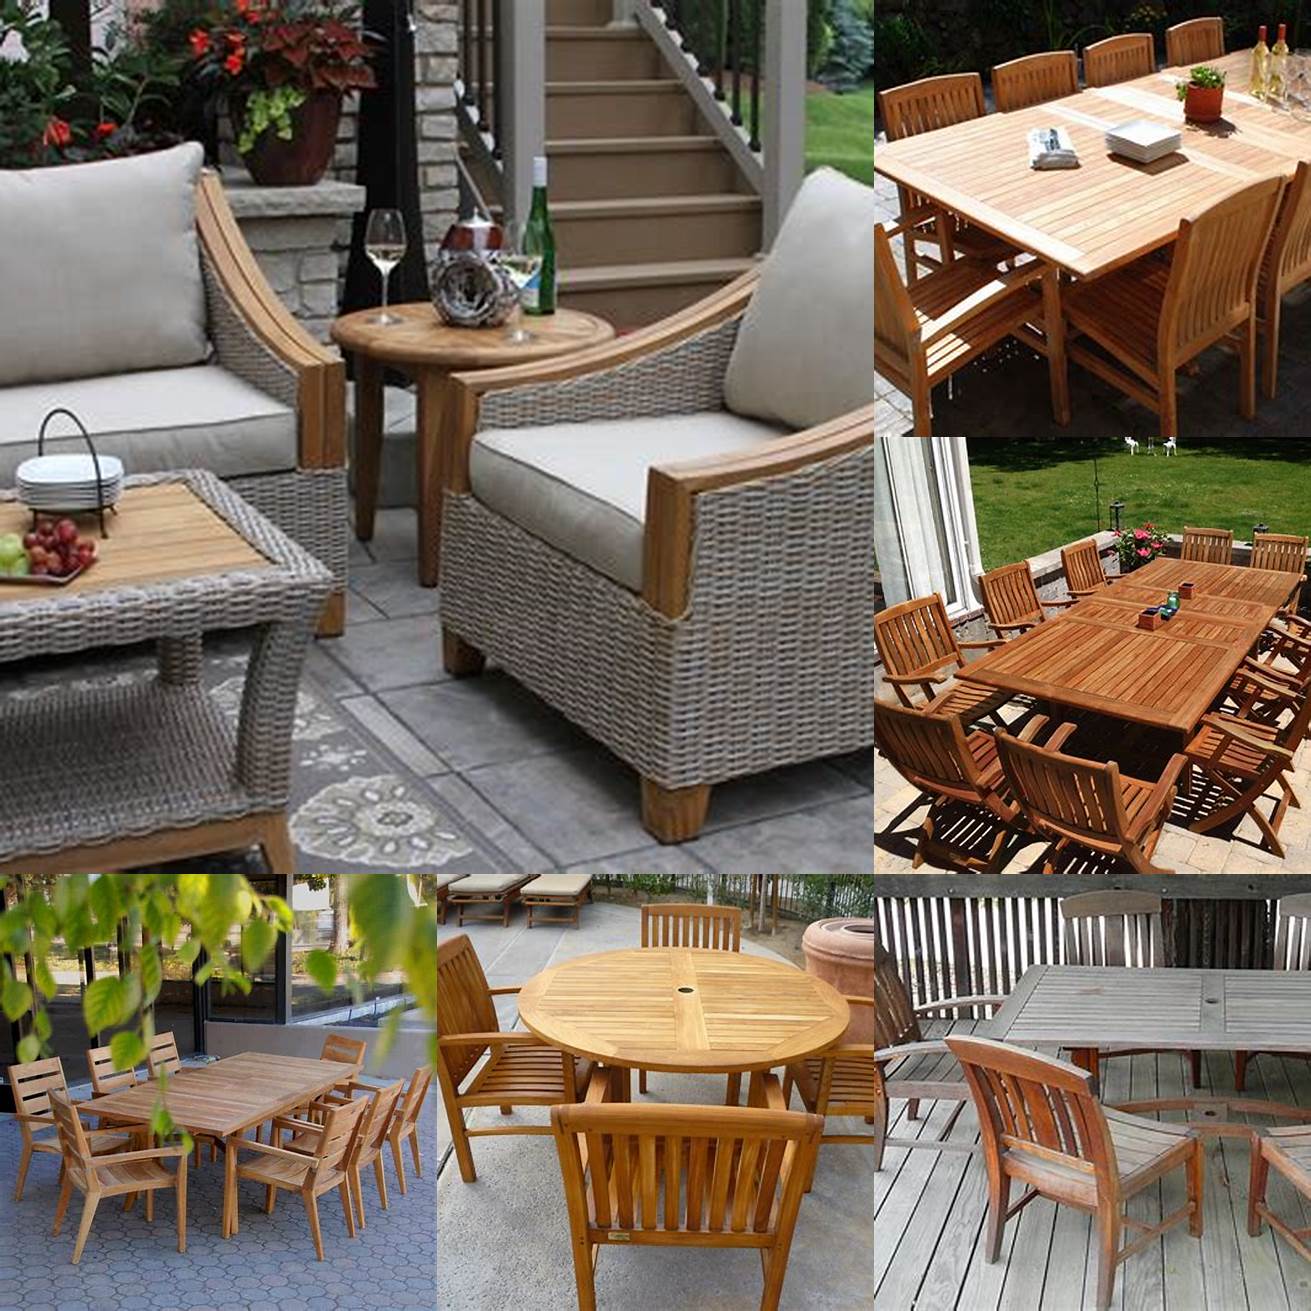 A picture of plantation teak furniture being used on a patio